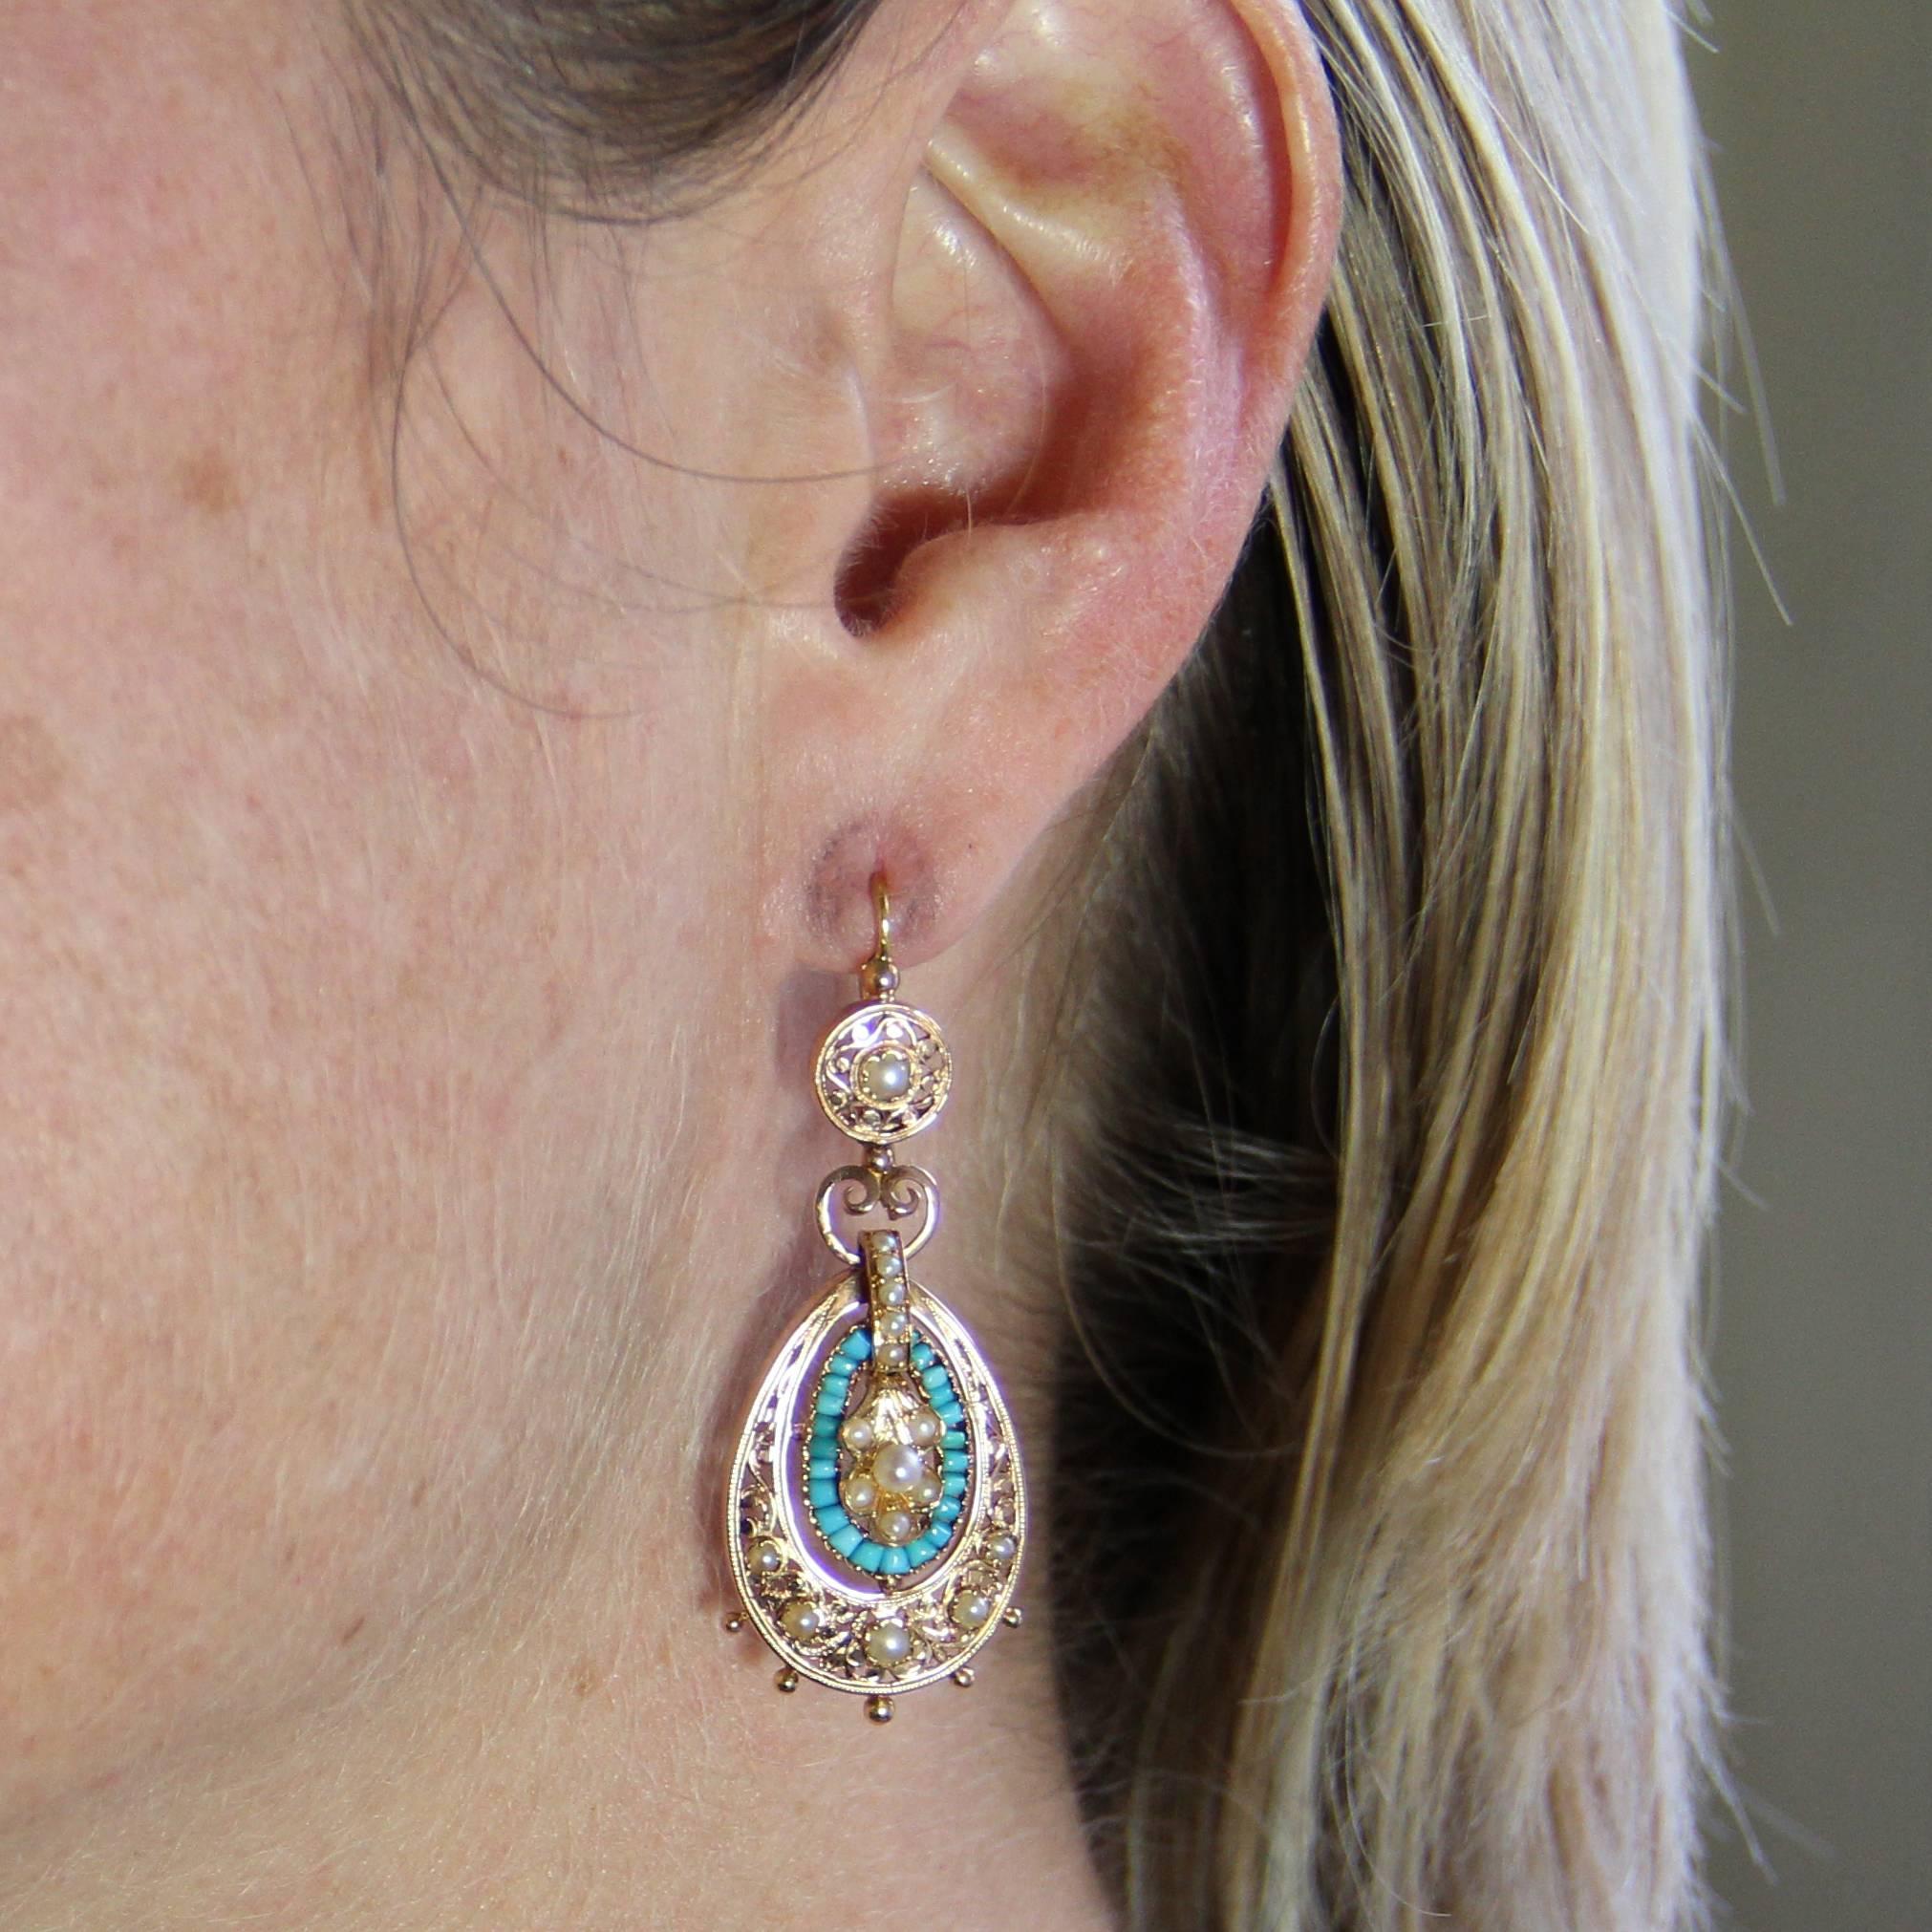 Earrings in 18 carats yellow and rose gold, eagle's head hallmark.
Splendid pendant earrings, each consists of a gold engraved disc set in the center of a half natural pearl and which supports a drop motif surmounted by a heart motif interconnected